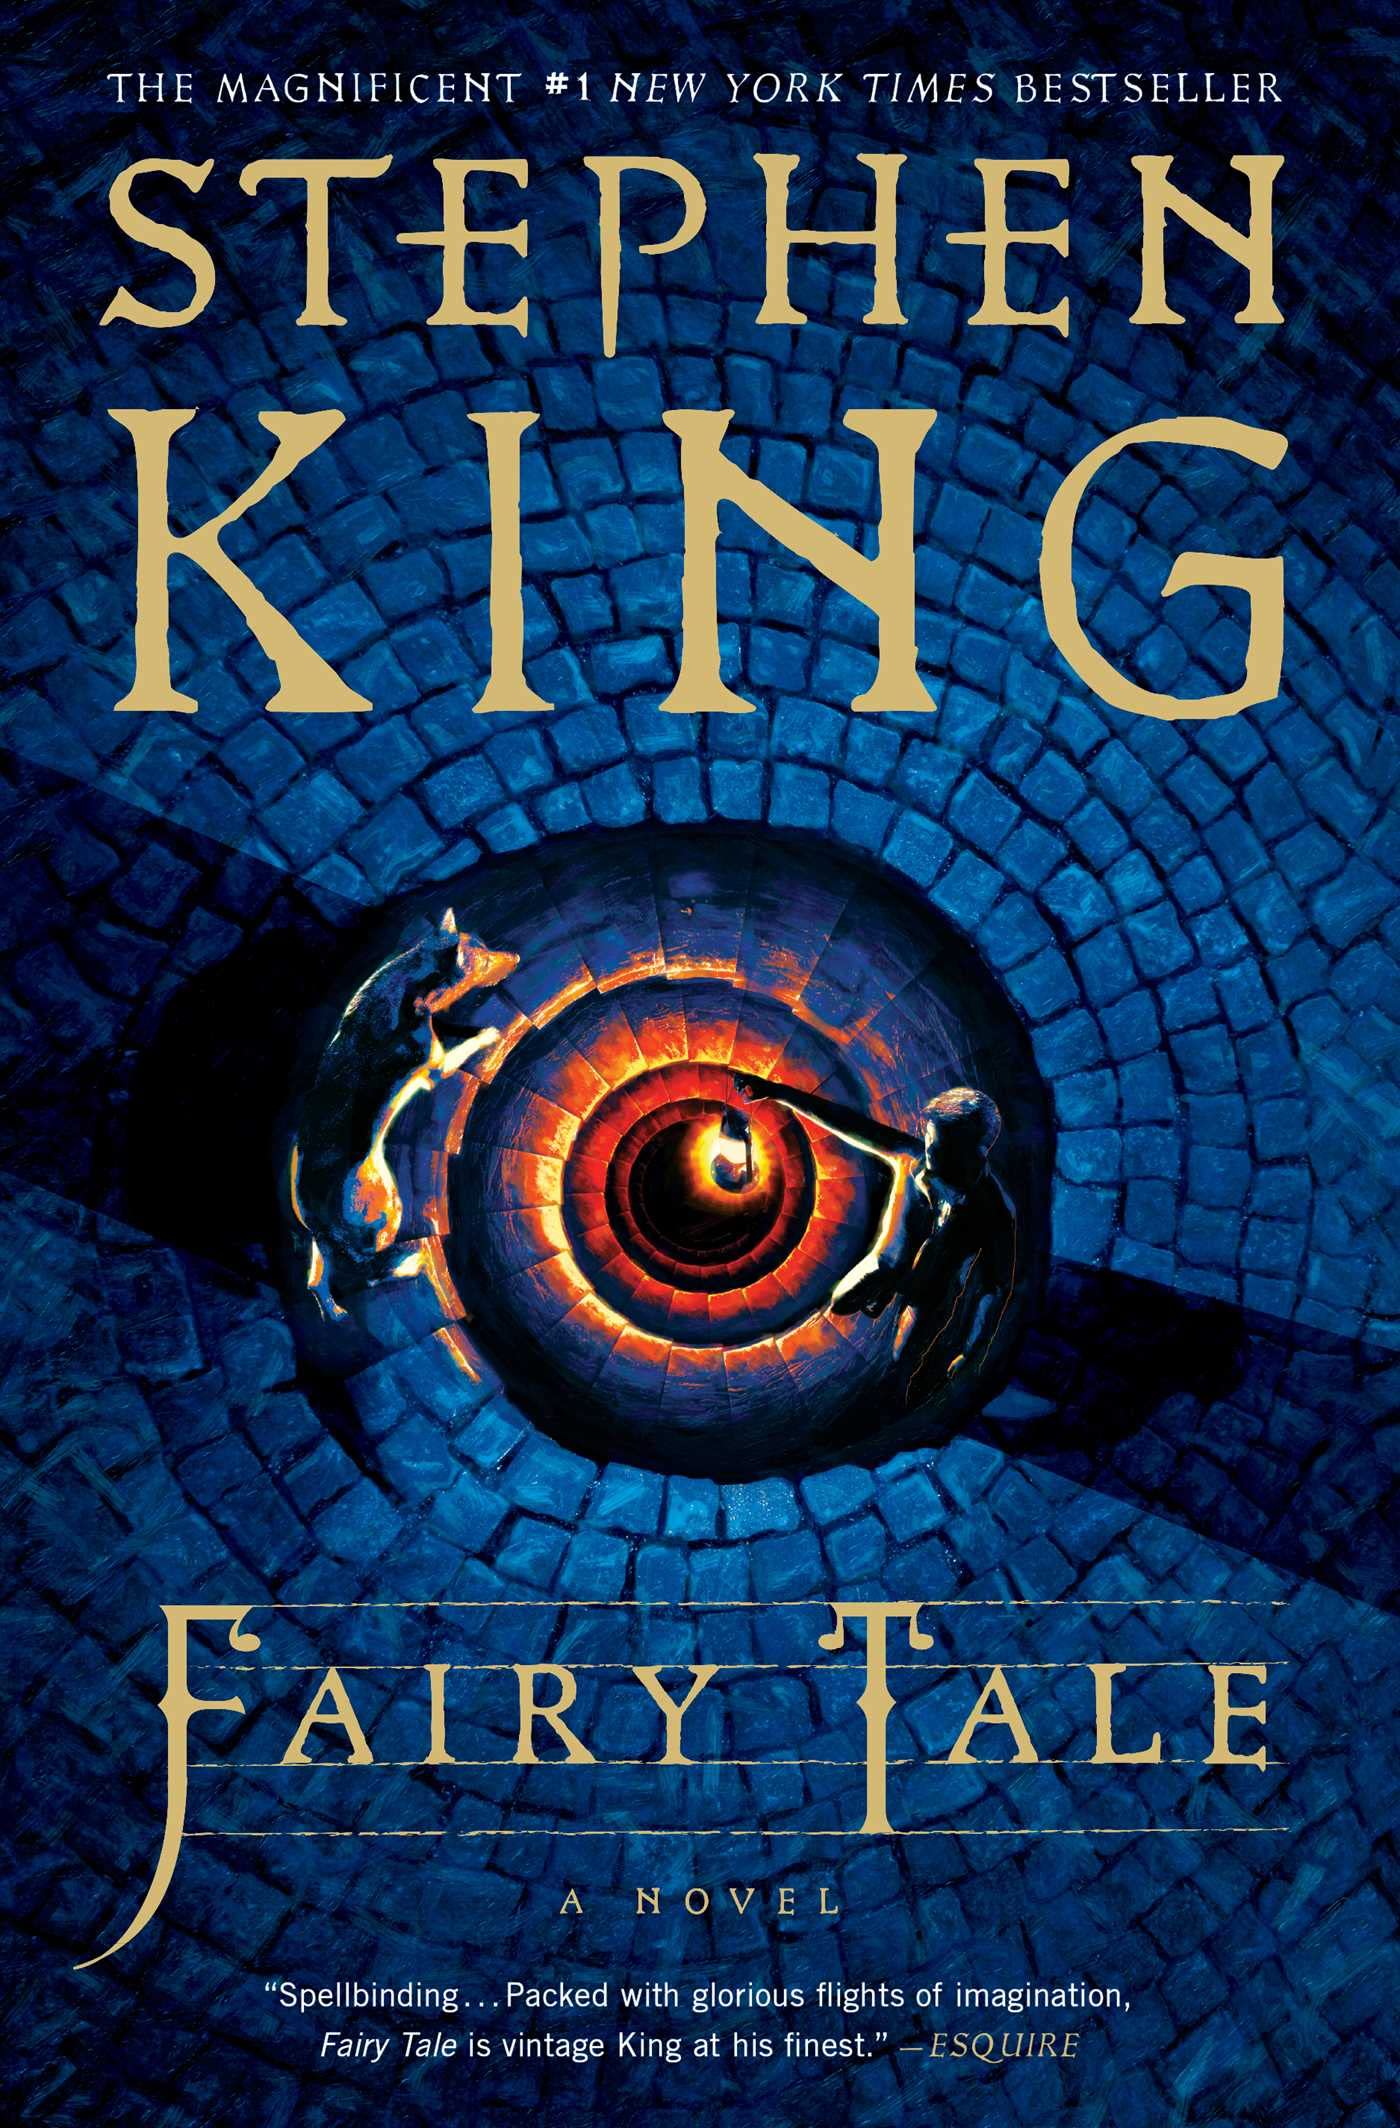 Can you recommend a Stephen King book for fans of fantasy novels?